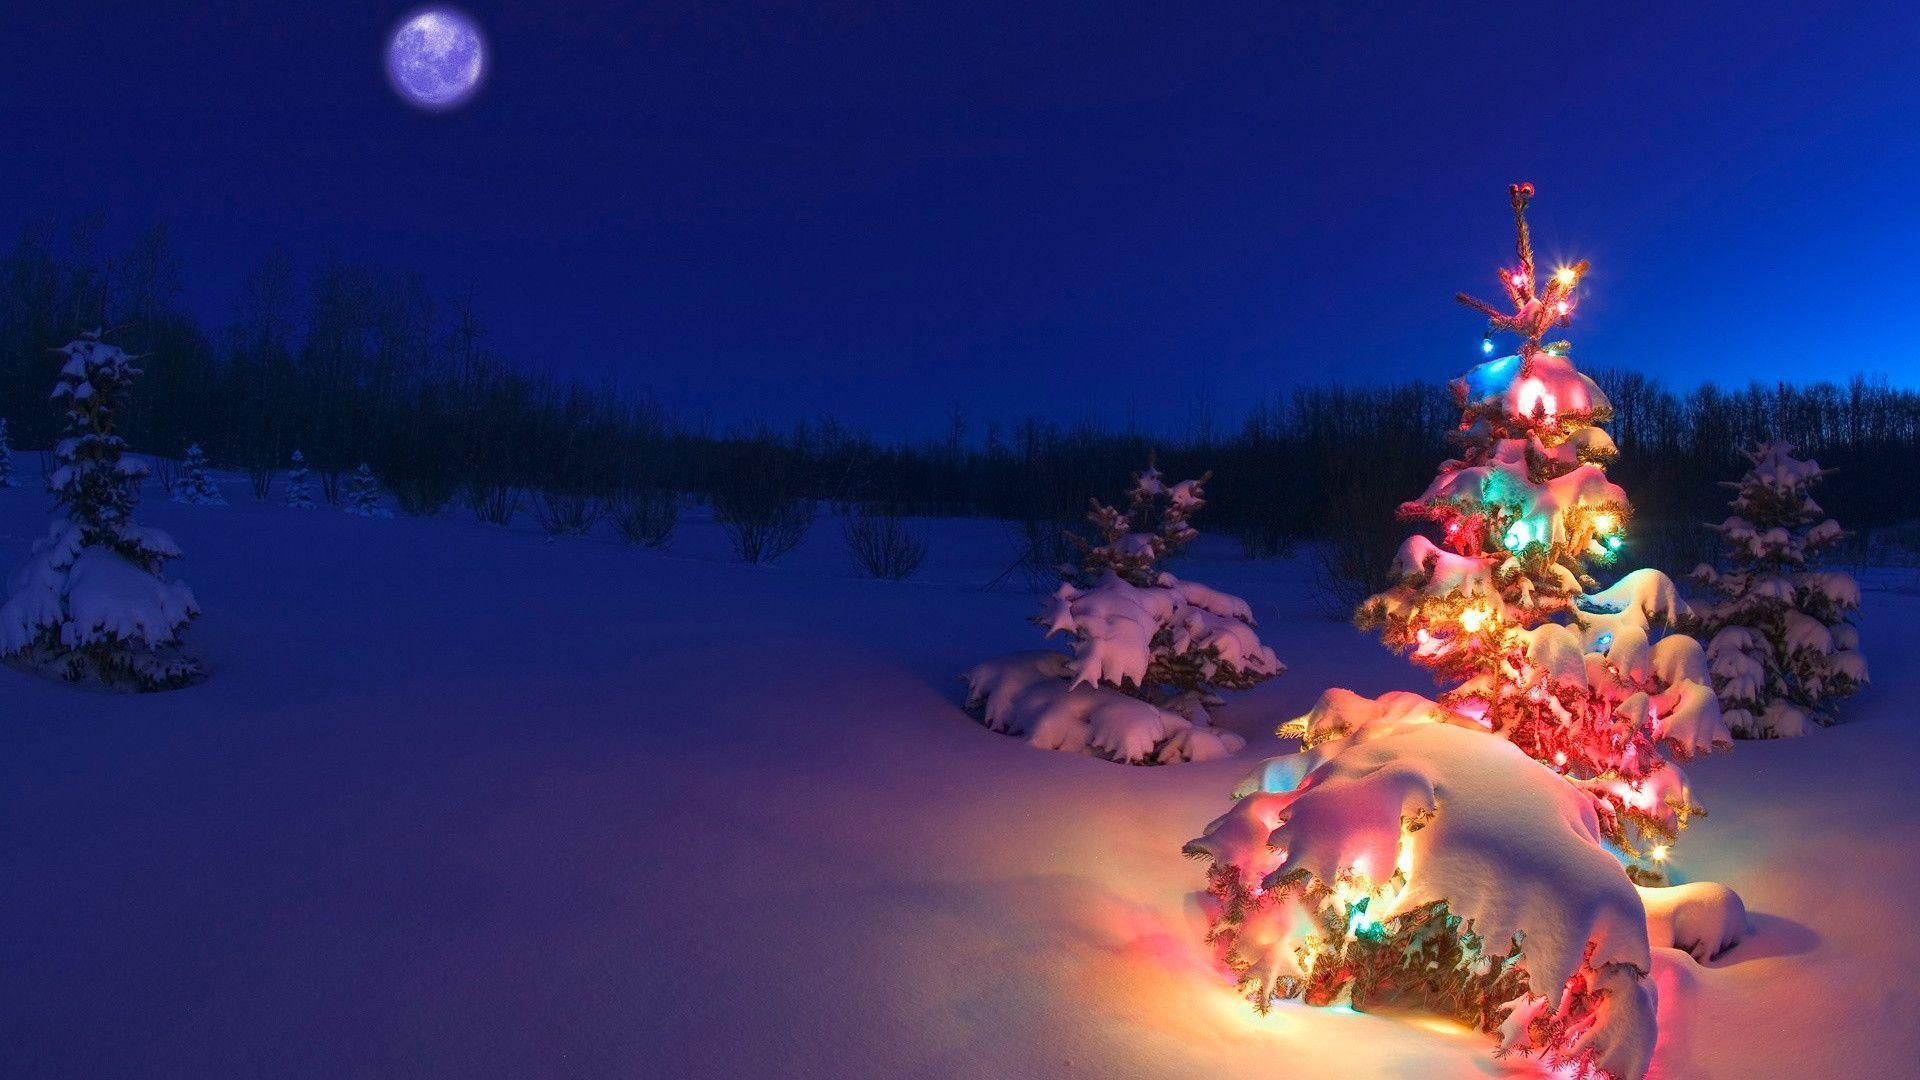 Beautiful HD Christmas Wallpapers for 2014